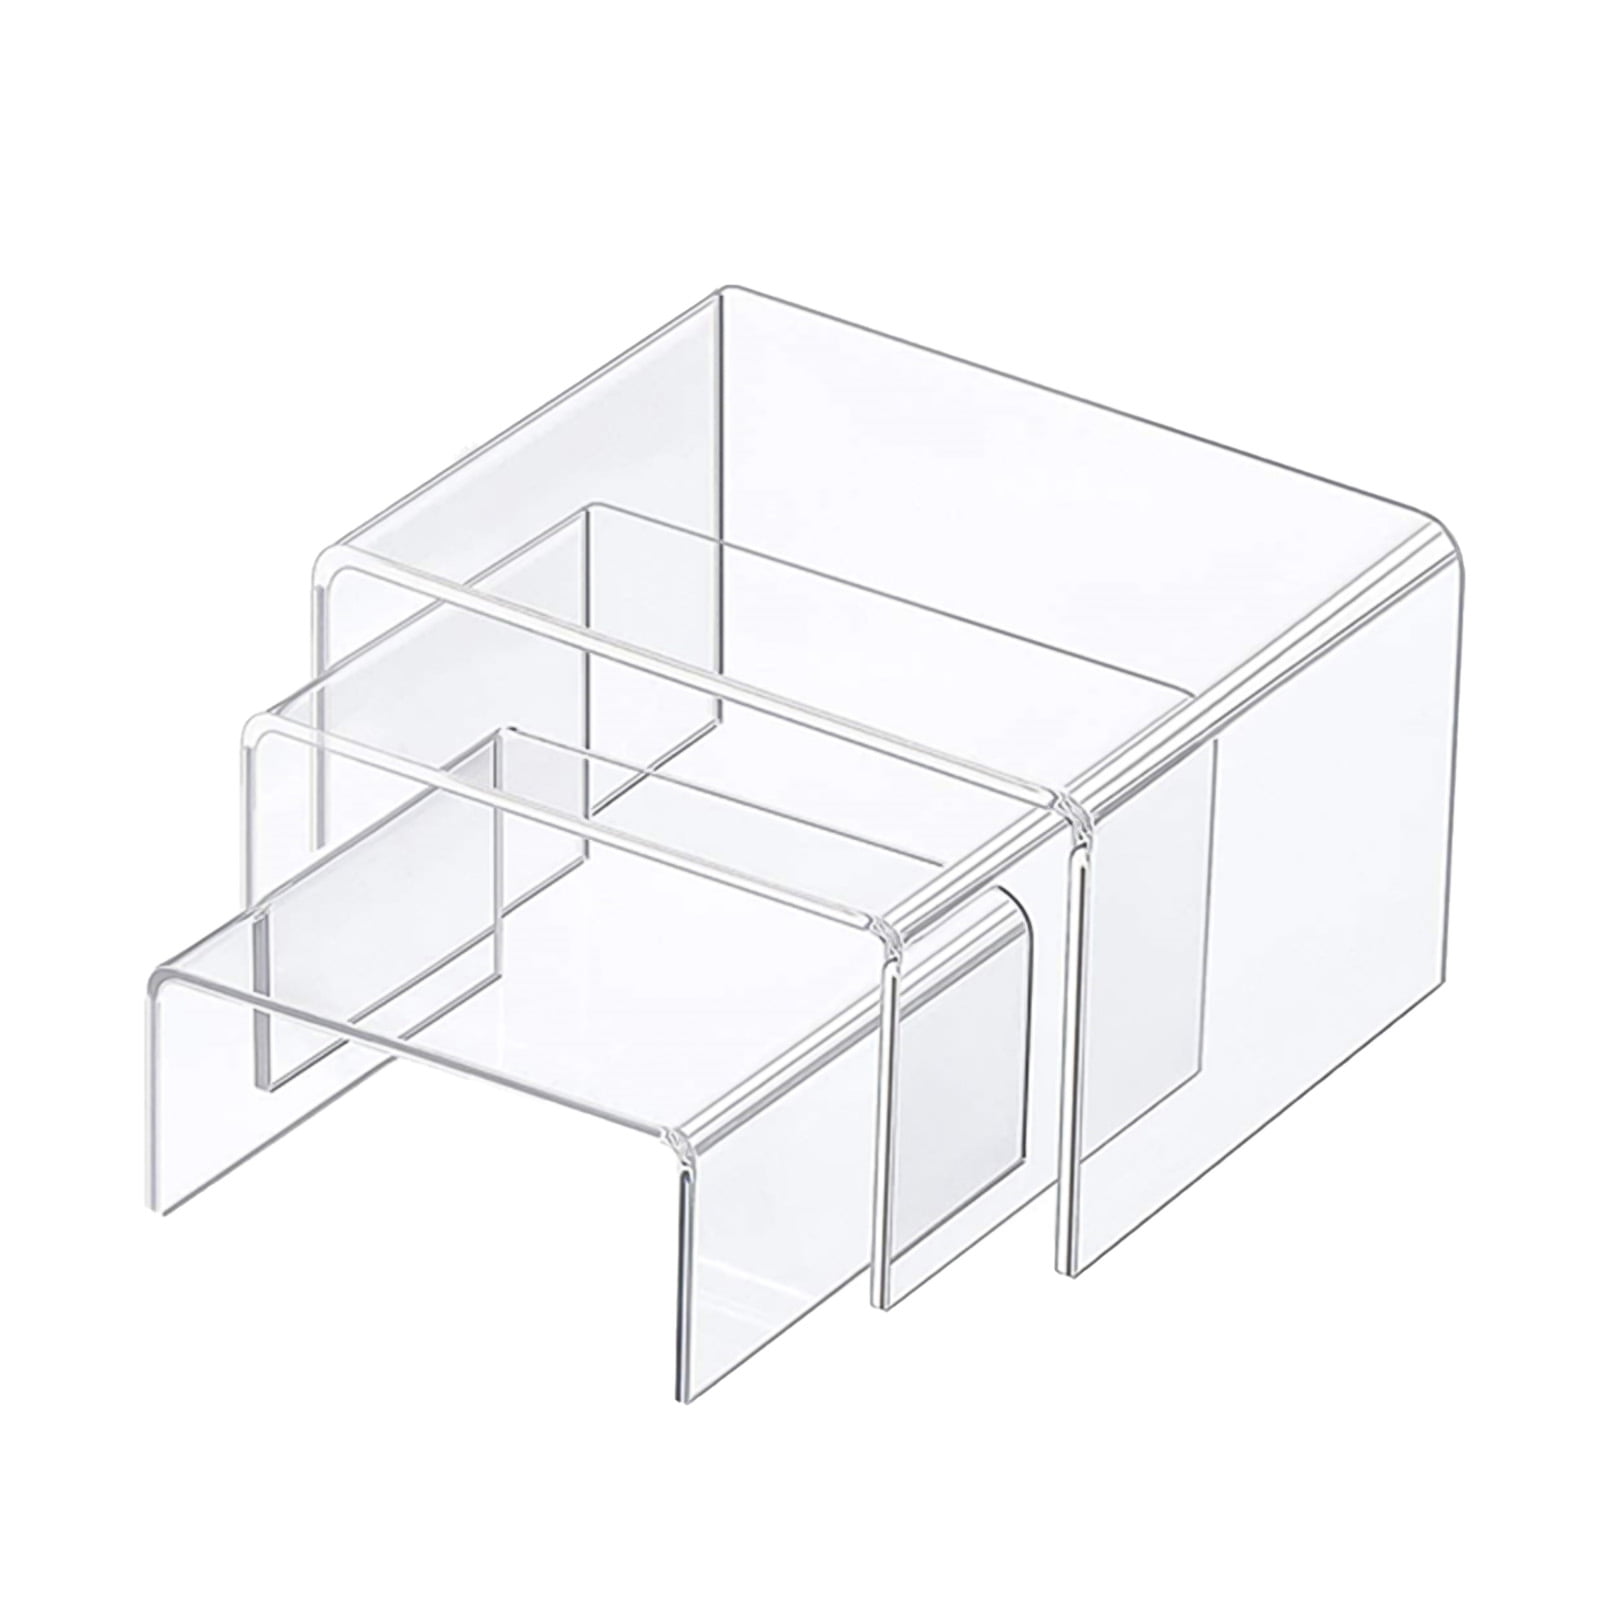 Clear Acrylic Display Riser Stand Pack of 3 for Showcase Store Home Decorations 